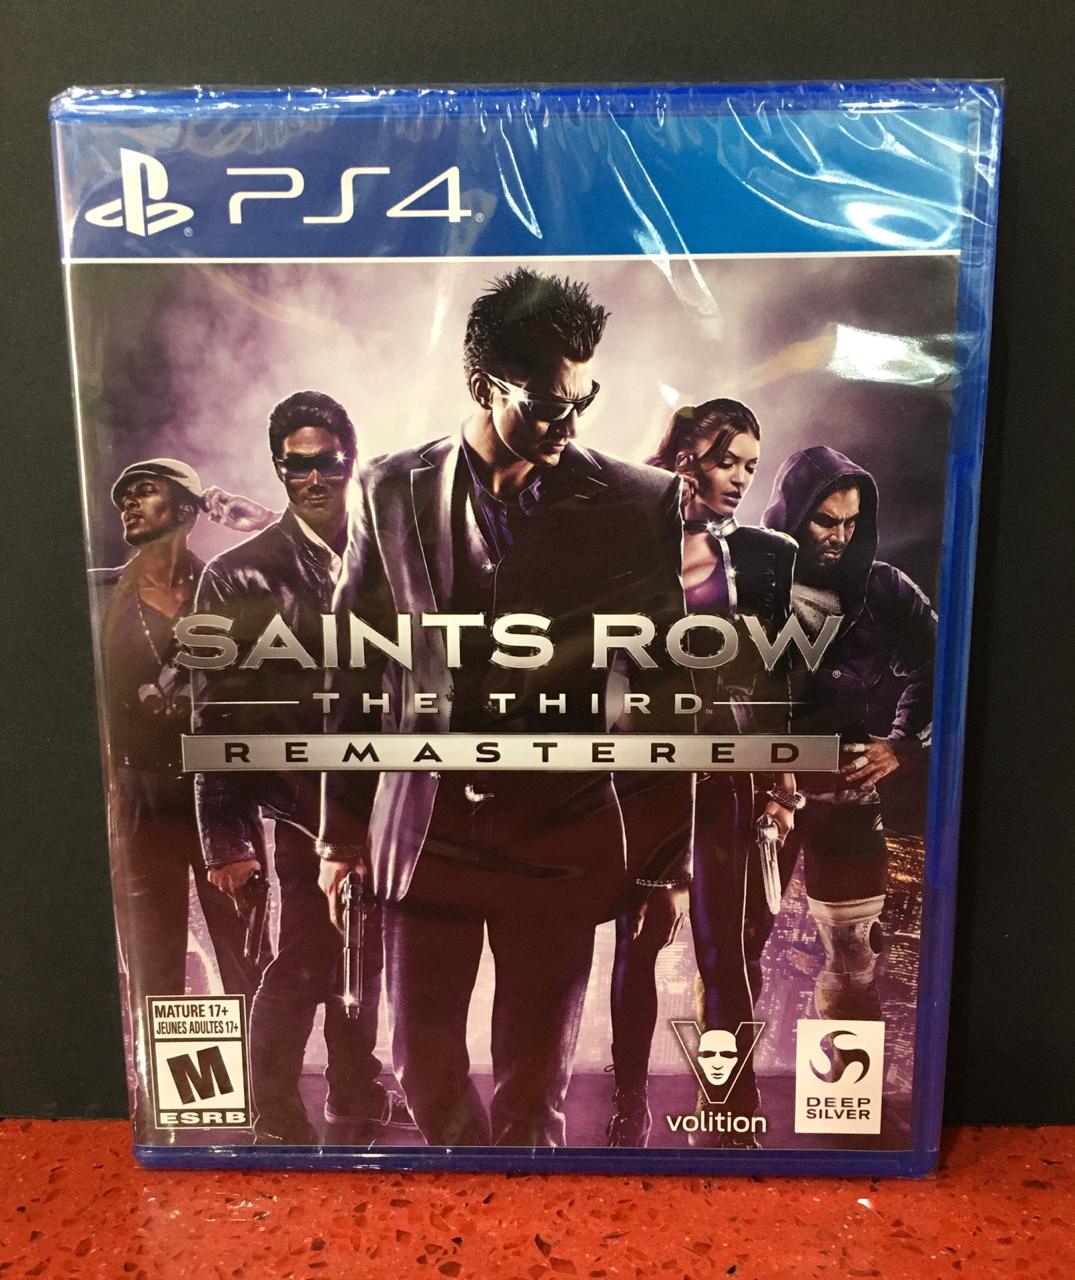 download playstation 4 saints row for free